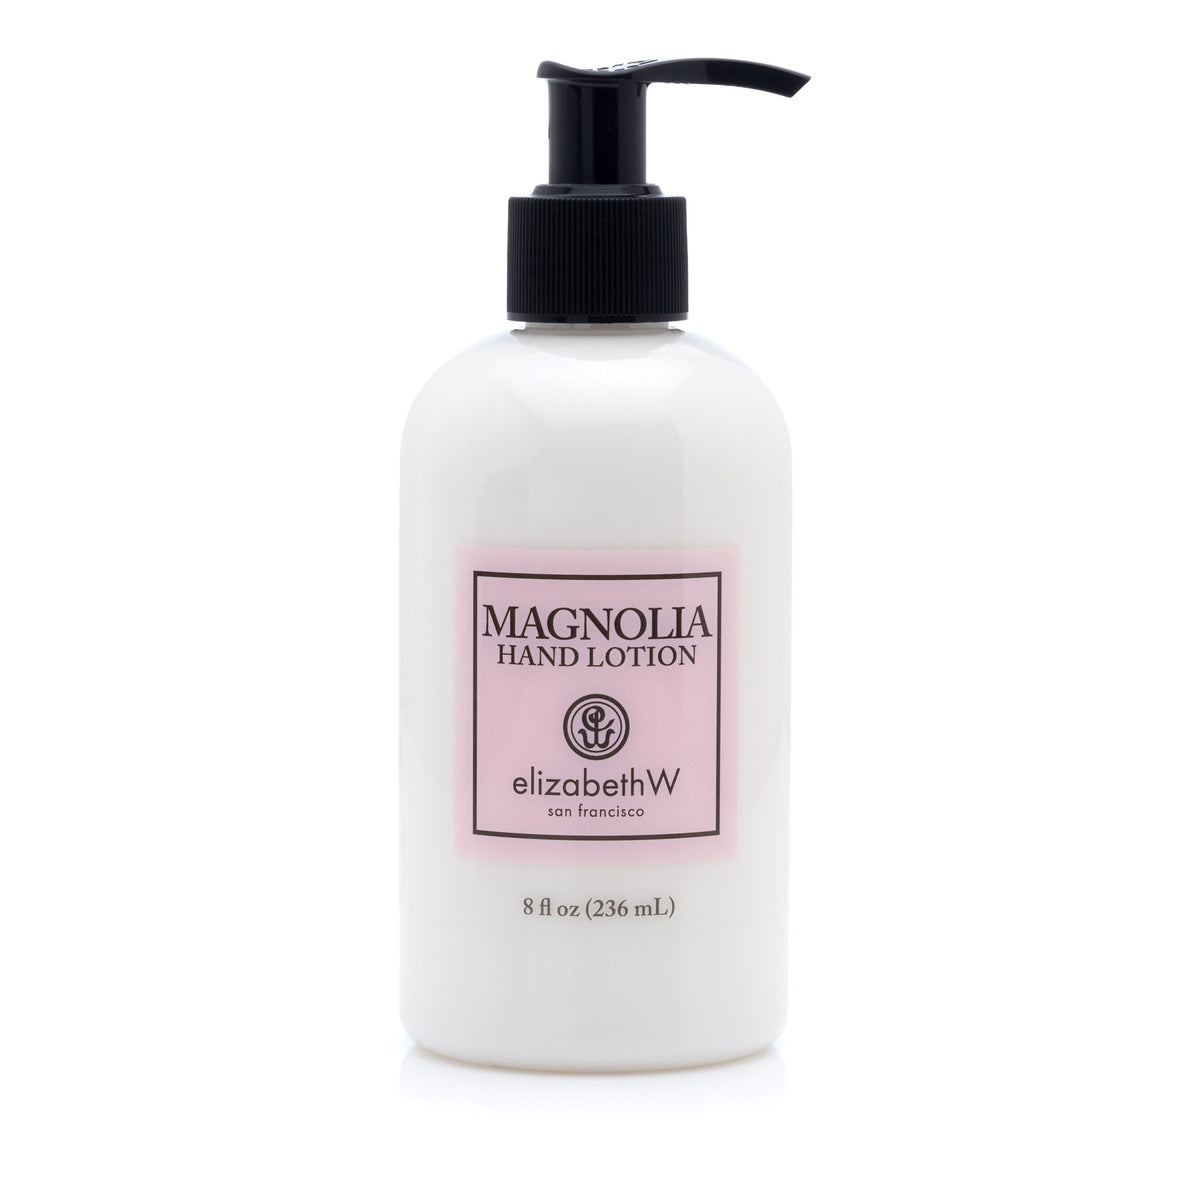 A bottle of white elizabeth W Signature Magnolia Hand Lotion, featuring a simple design with a pink label, a pump dispenser, and an 8 fl oz volume, isolated on a white background.